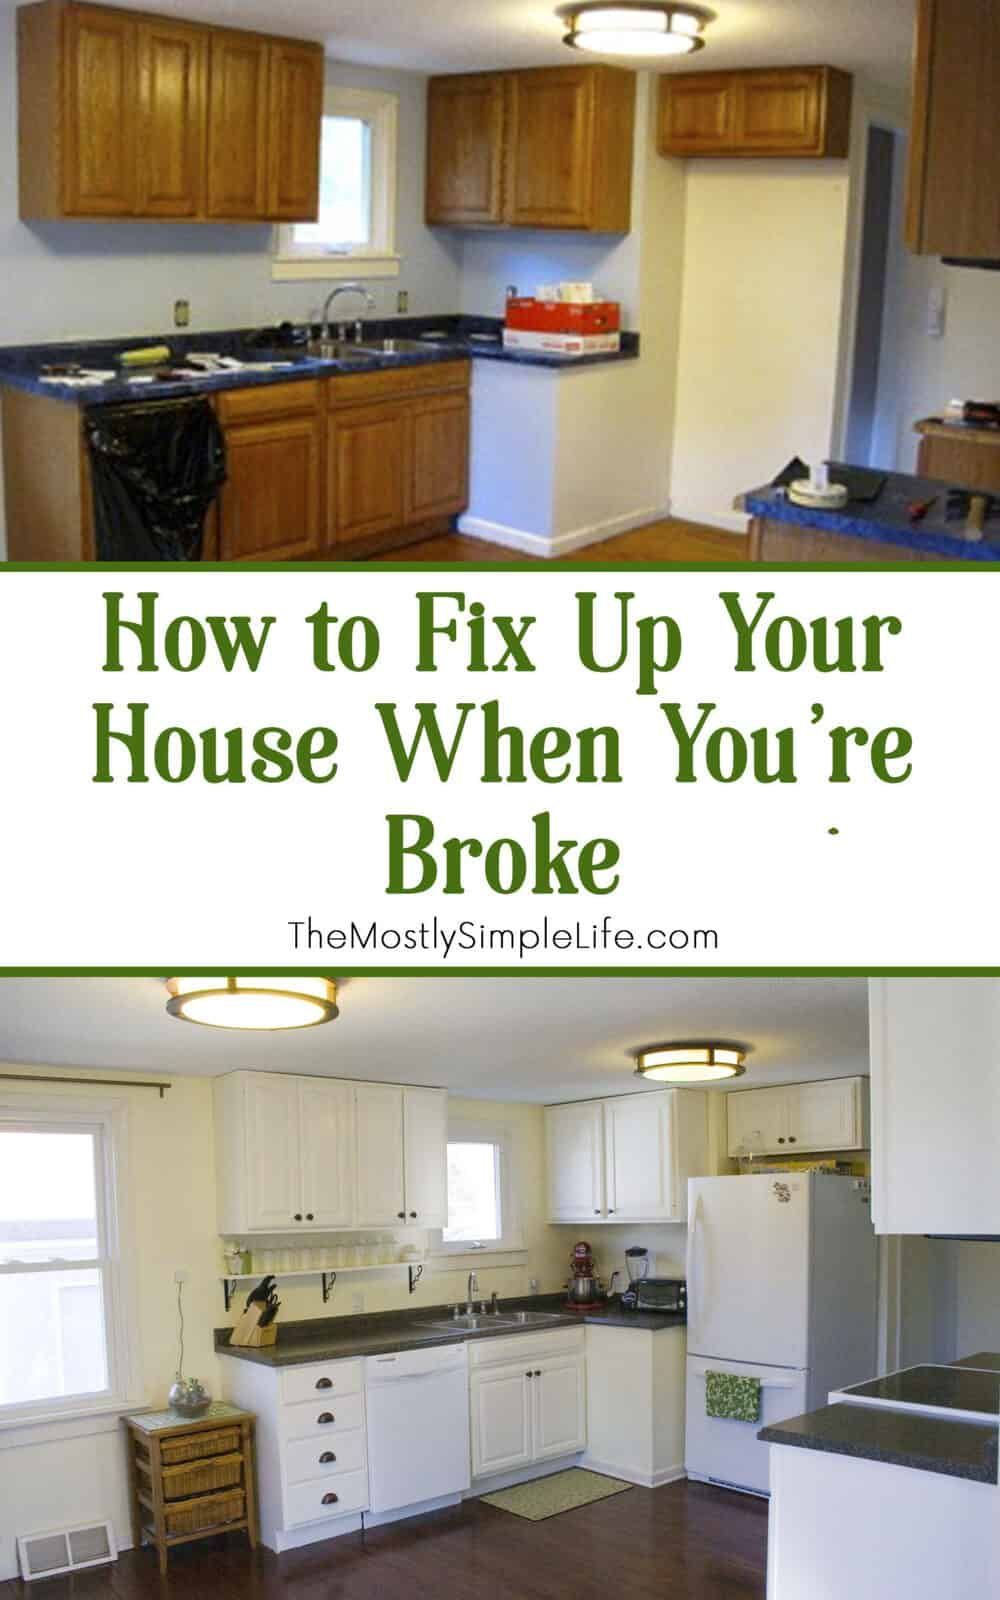 How to Fix Up Your House When You're Broke - How to Fix Up Your House When You're Broke -   17 diy House fixer upper ideas